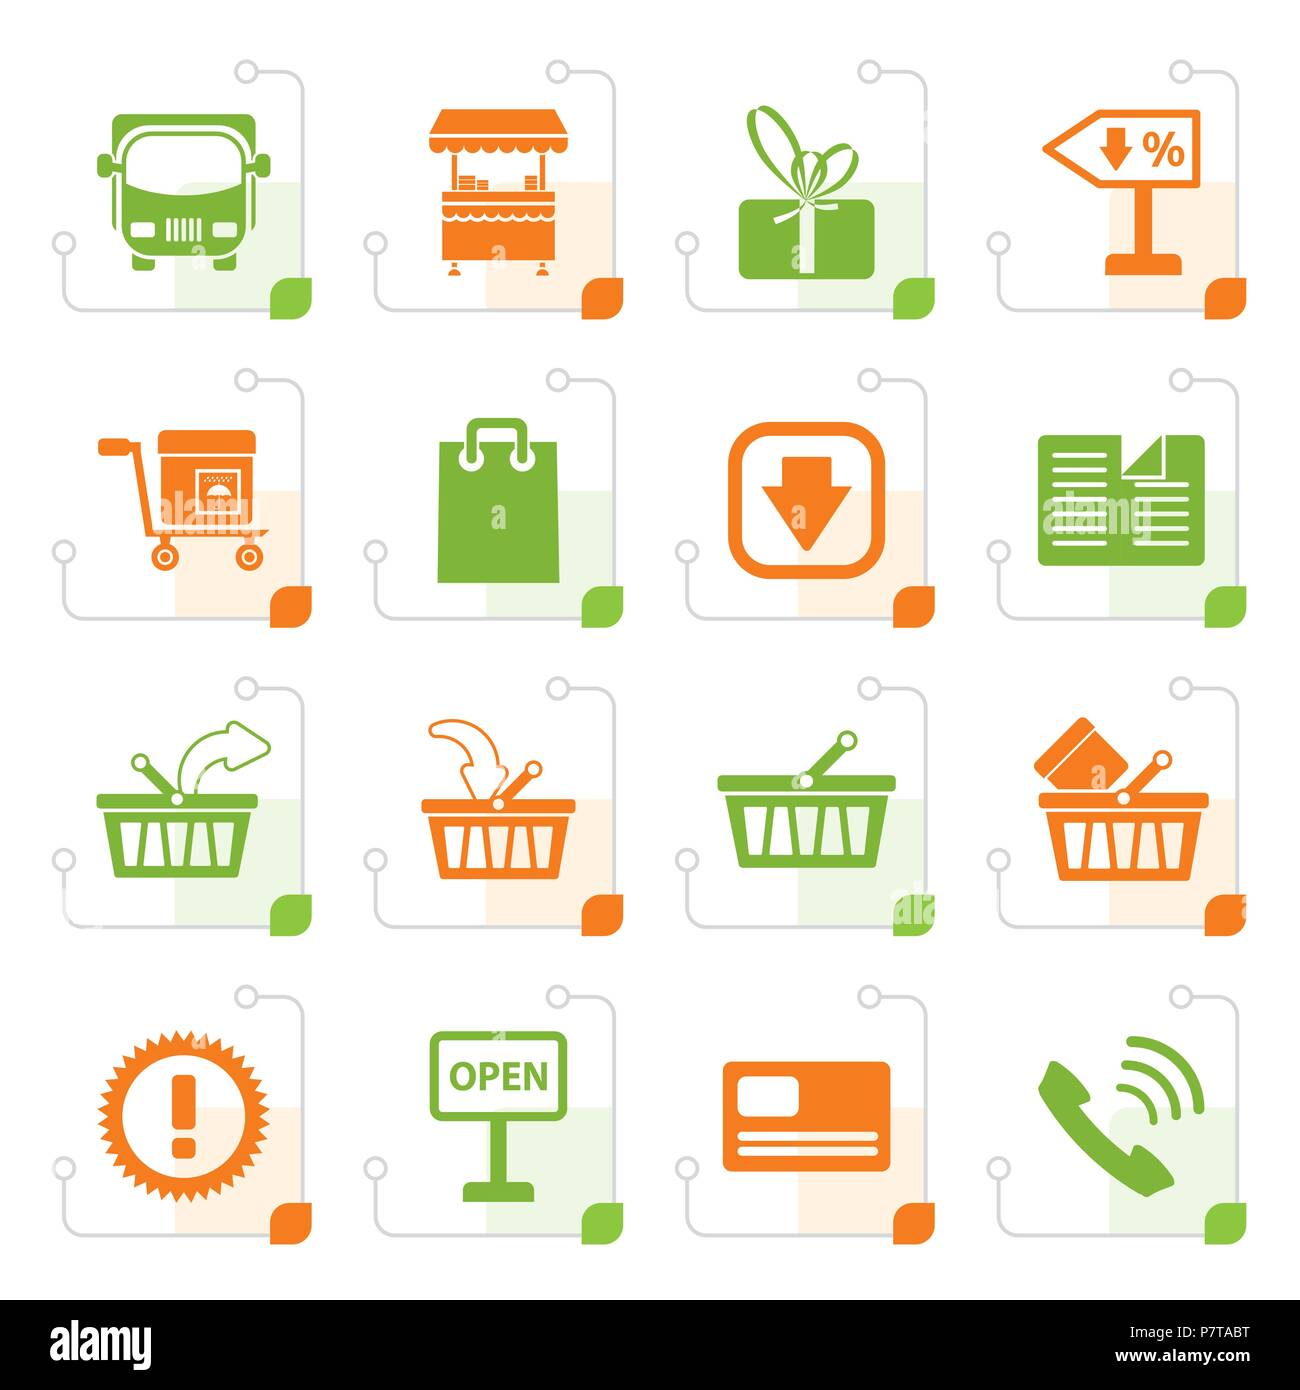 Stylized Online shop icons - vector icon set Stock Vector